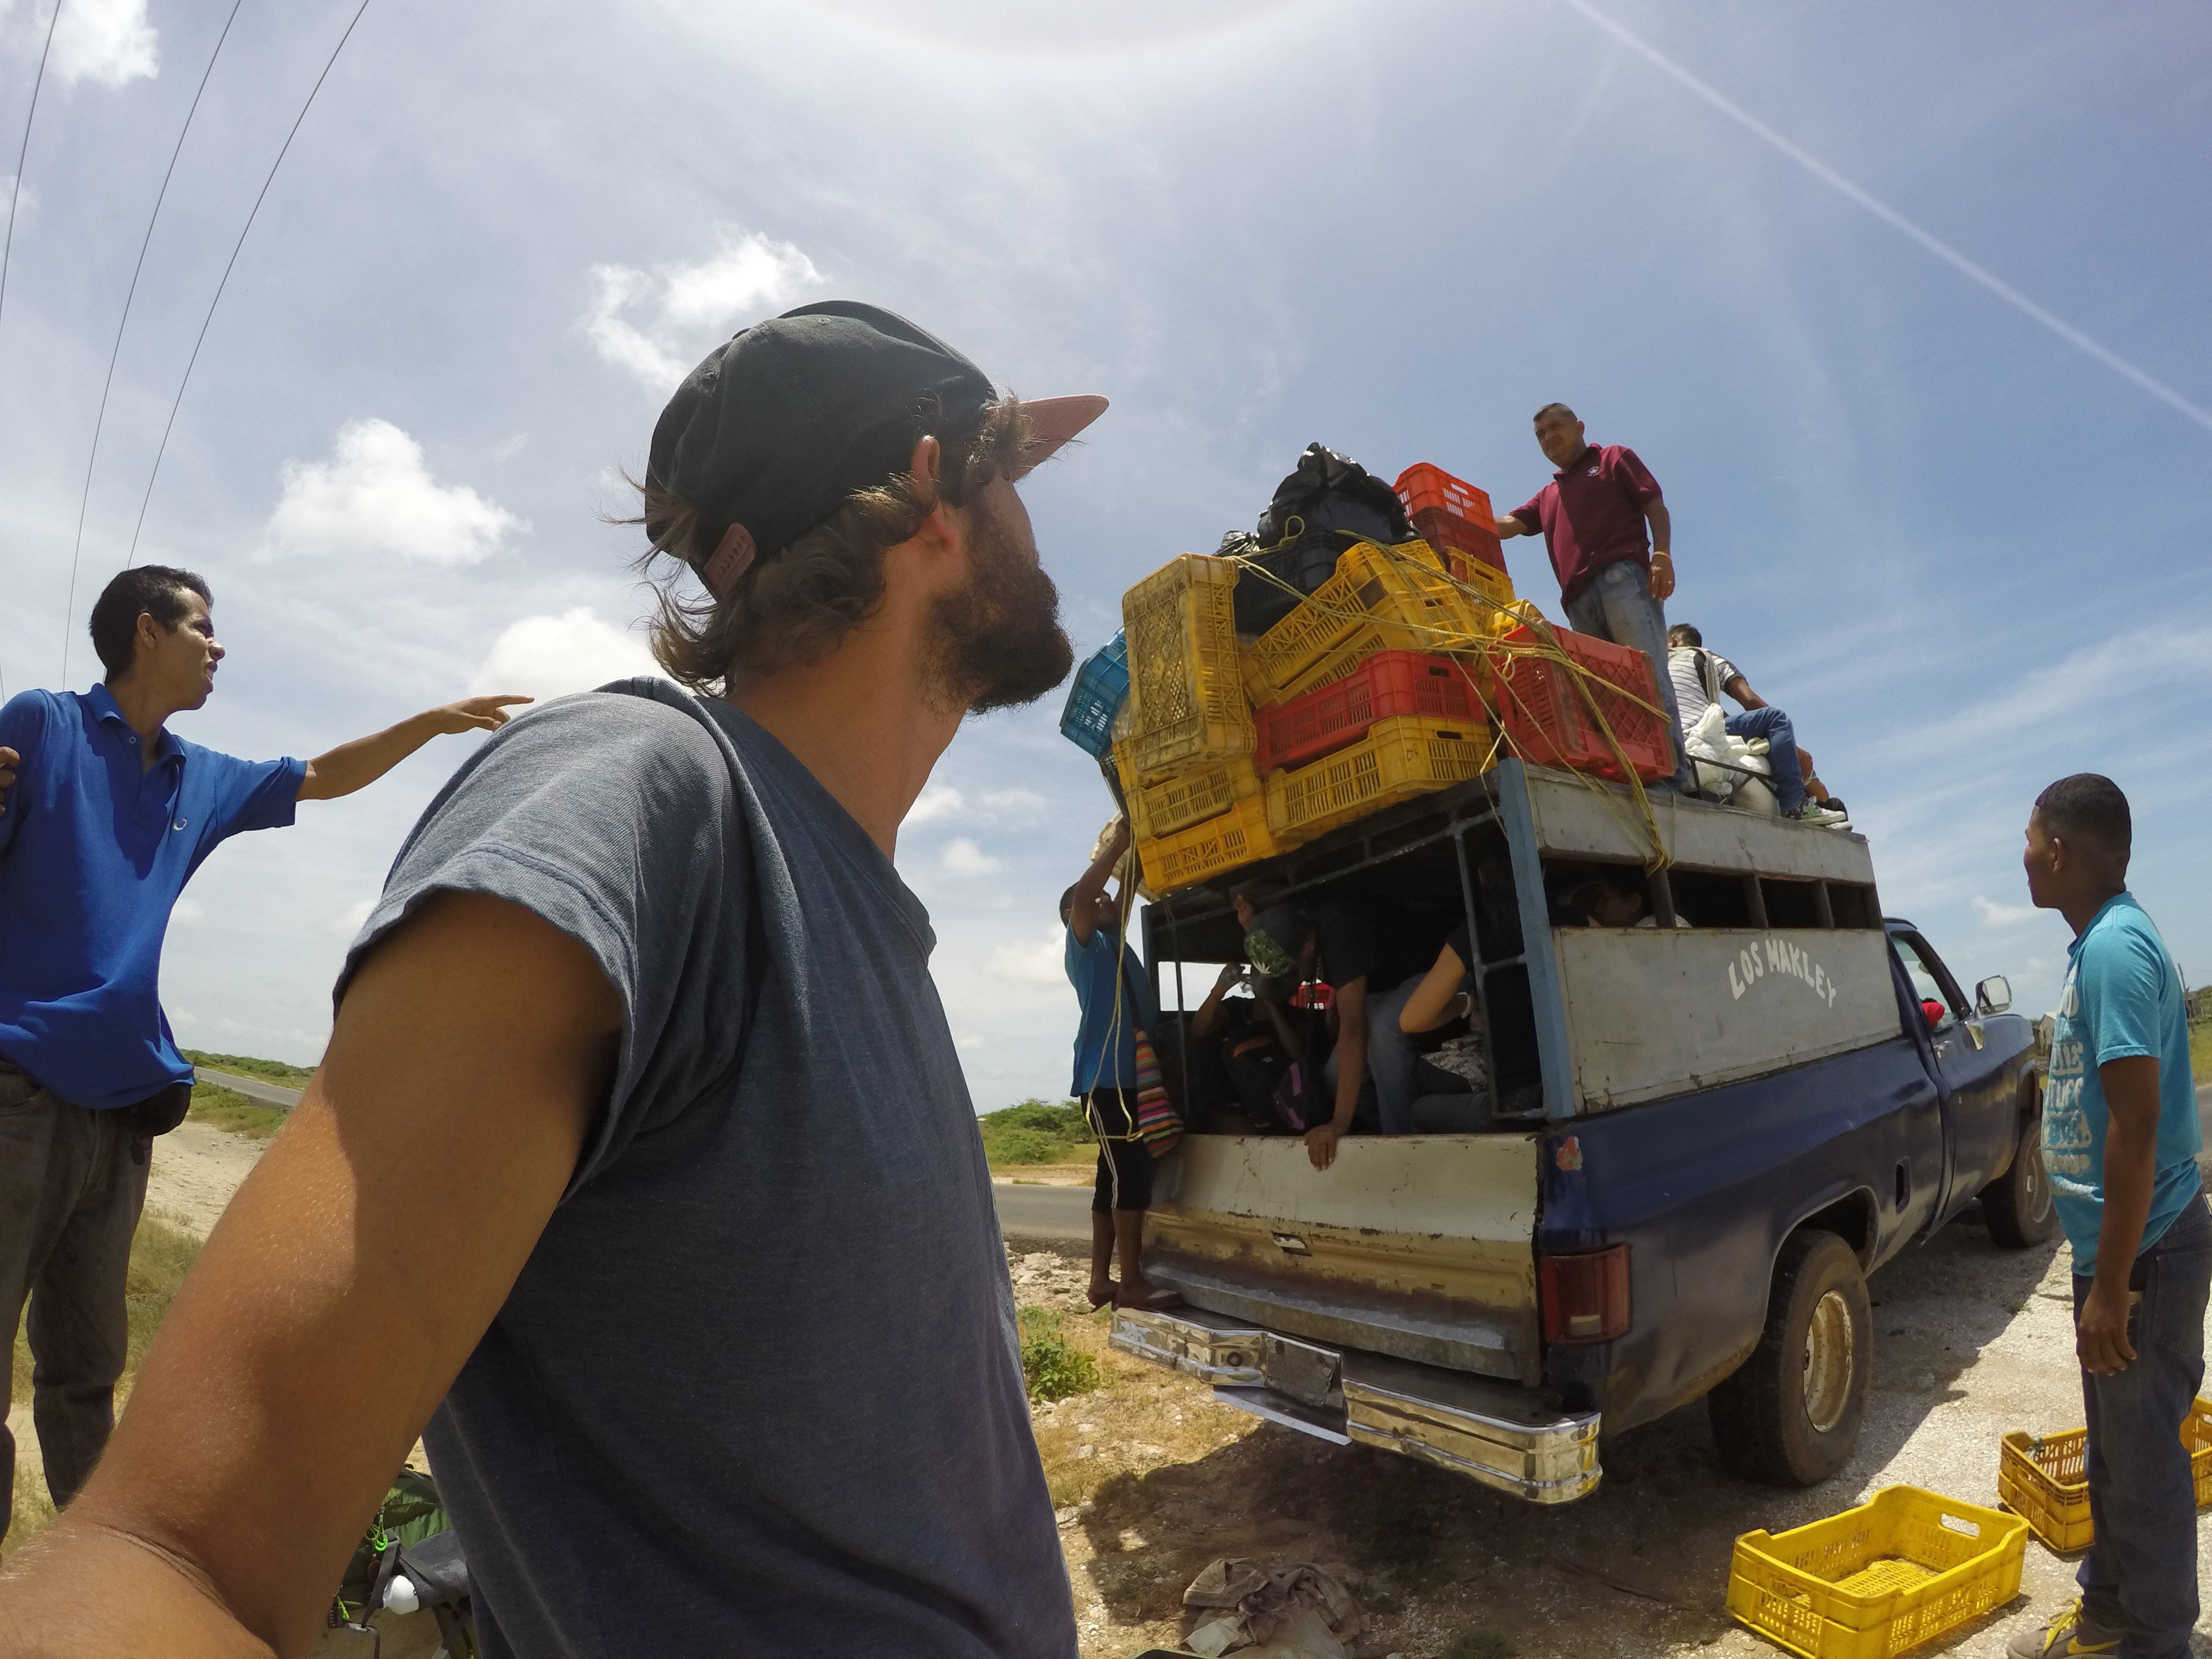 How to travel overland from Colombia to Venezuela